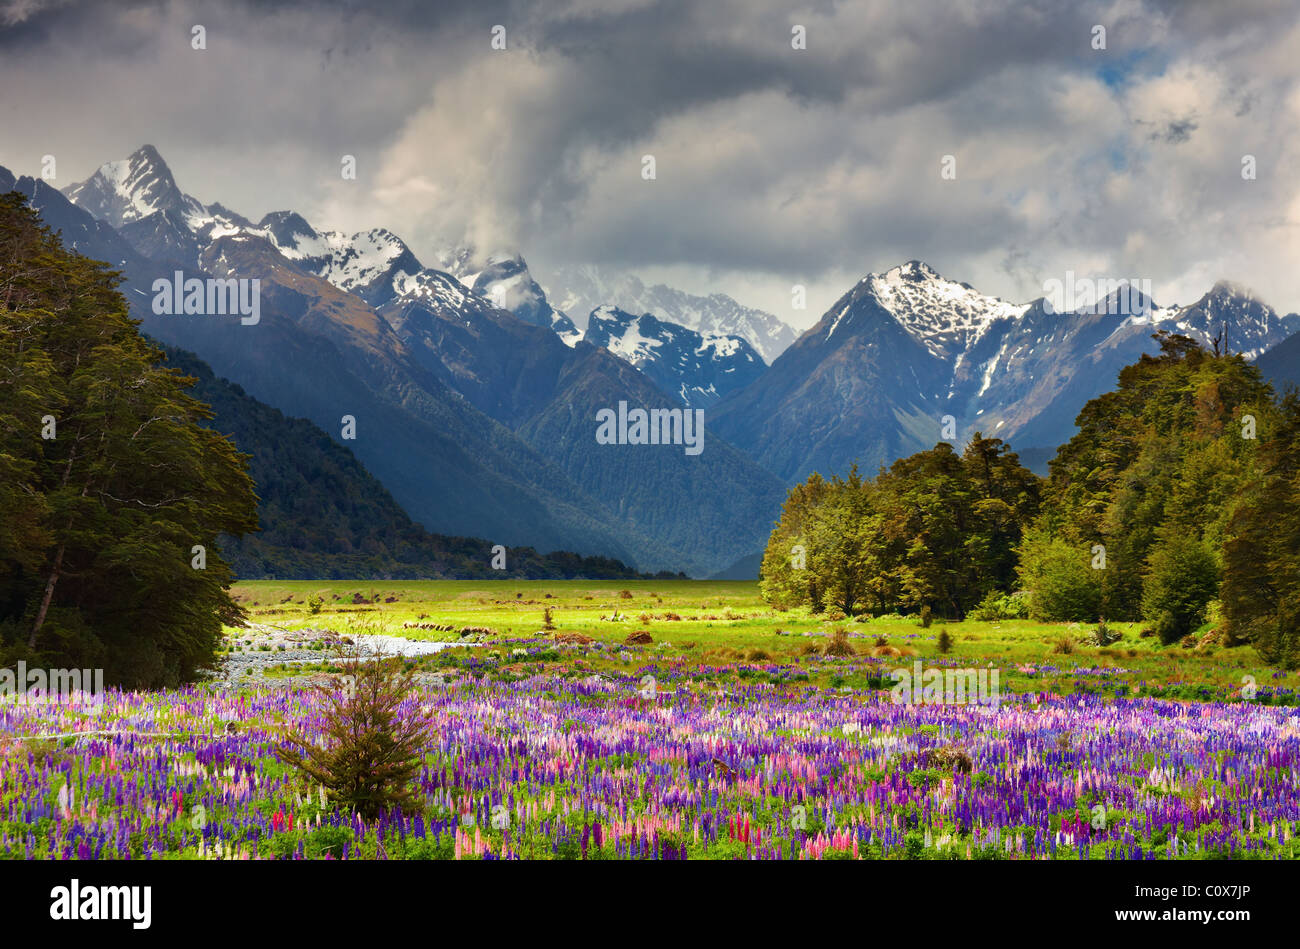 Mountain landscape with blossoming field, New Zealand Stock Photo